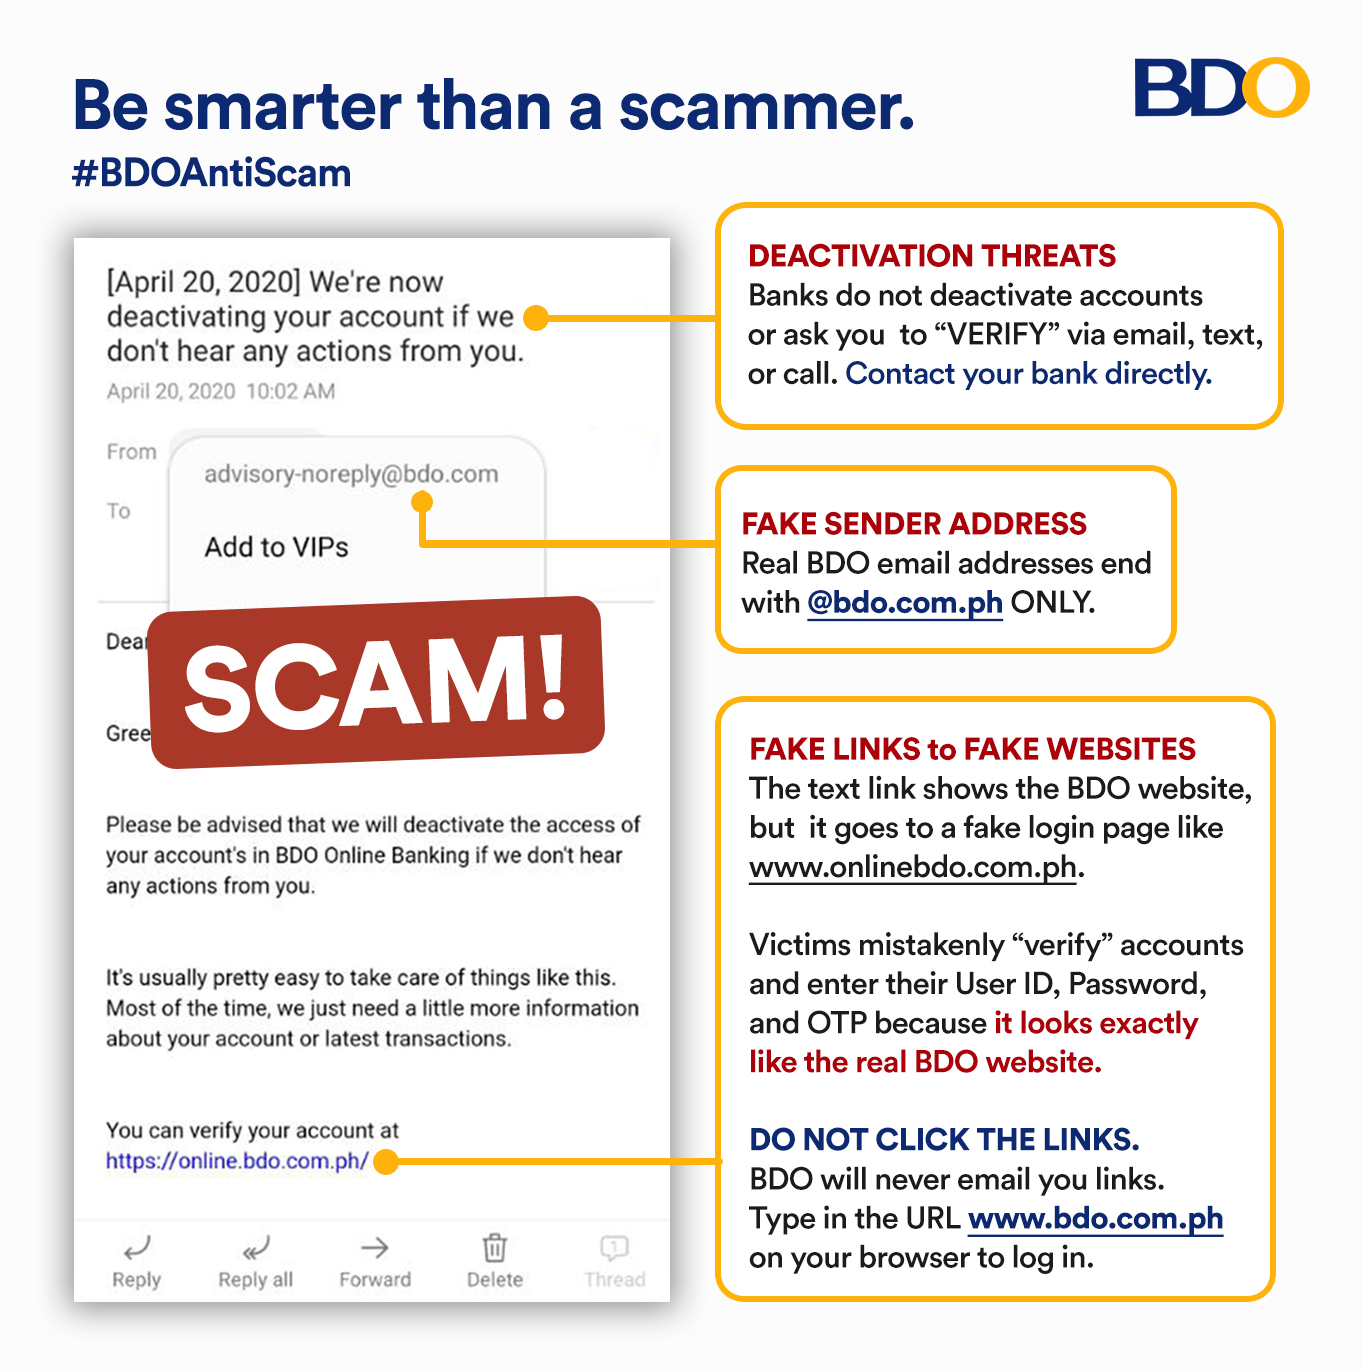 6 Tips to Outsmart Scammer